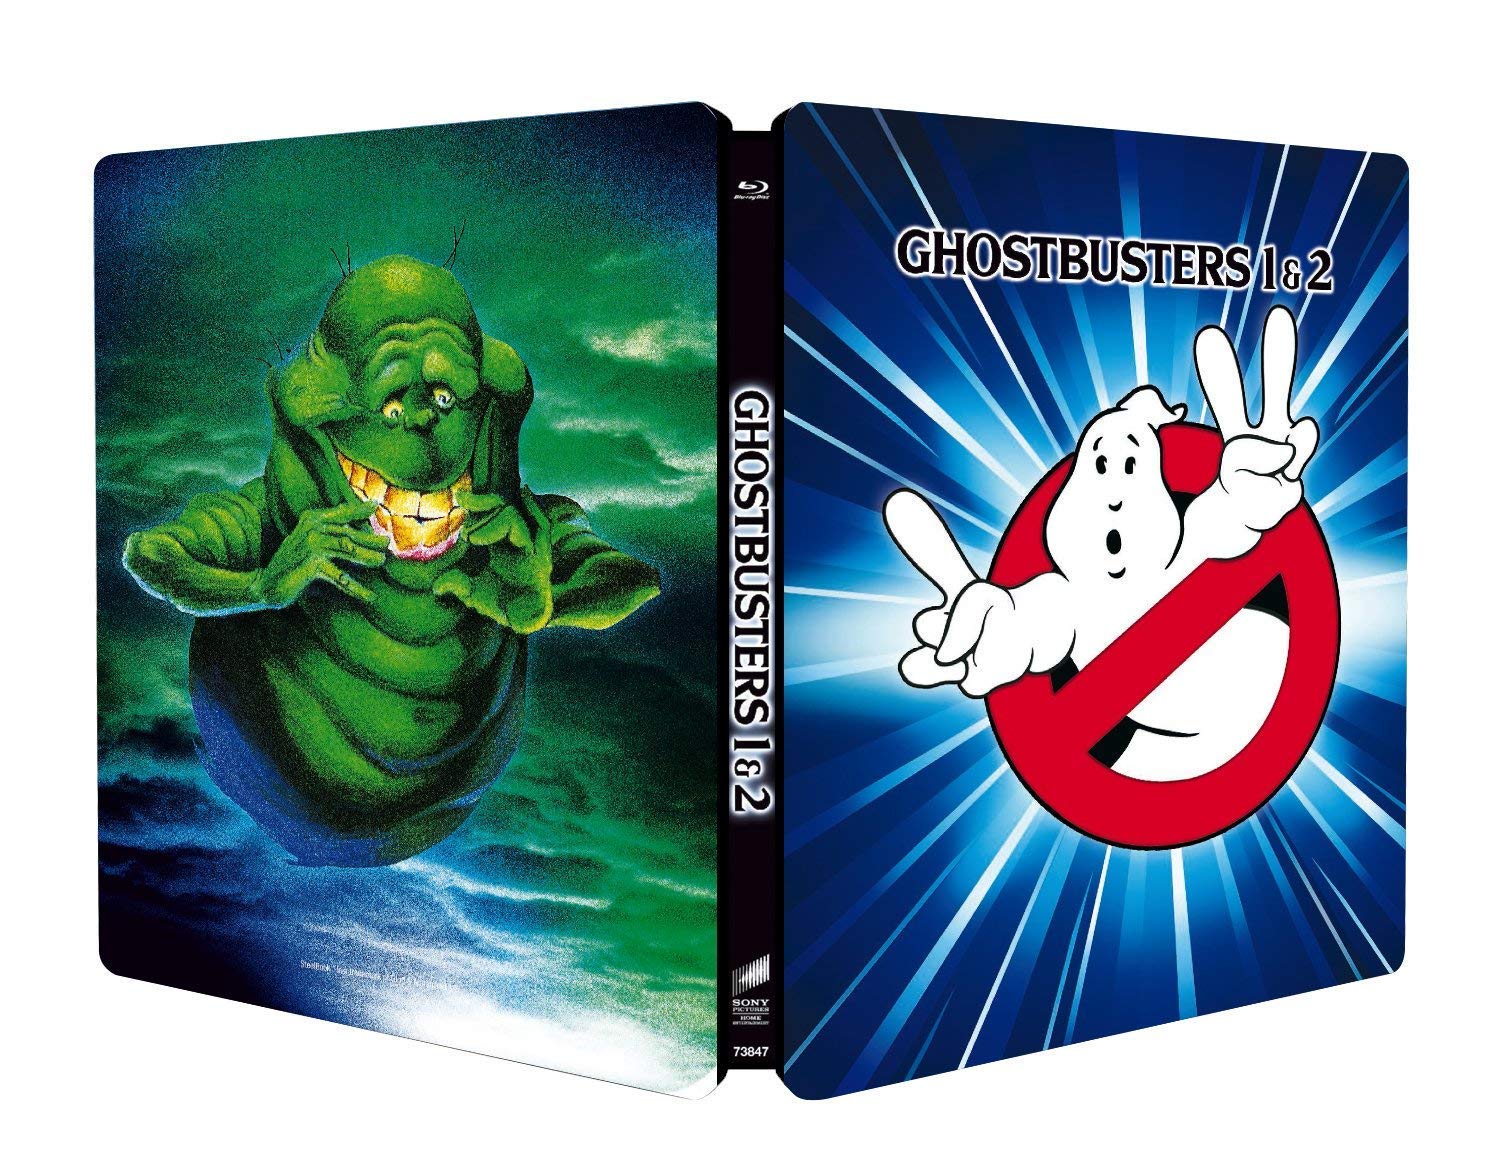 Ghostbusters Collection 1-2 (Steelbook) (2 Blu-Ray)